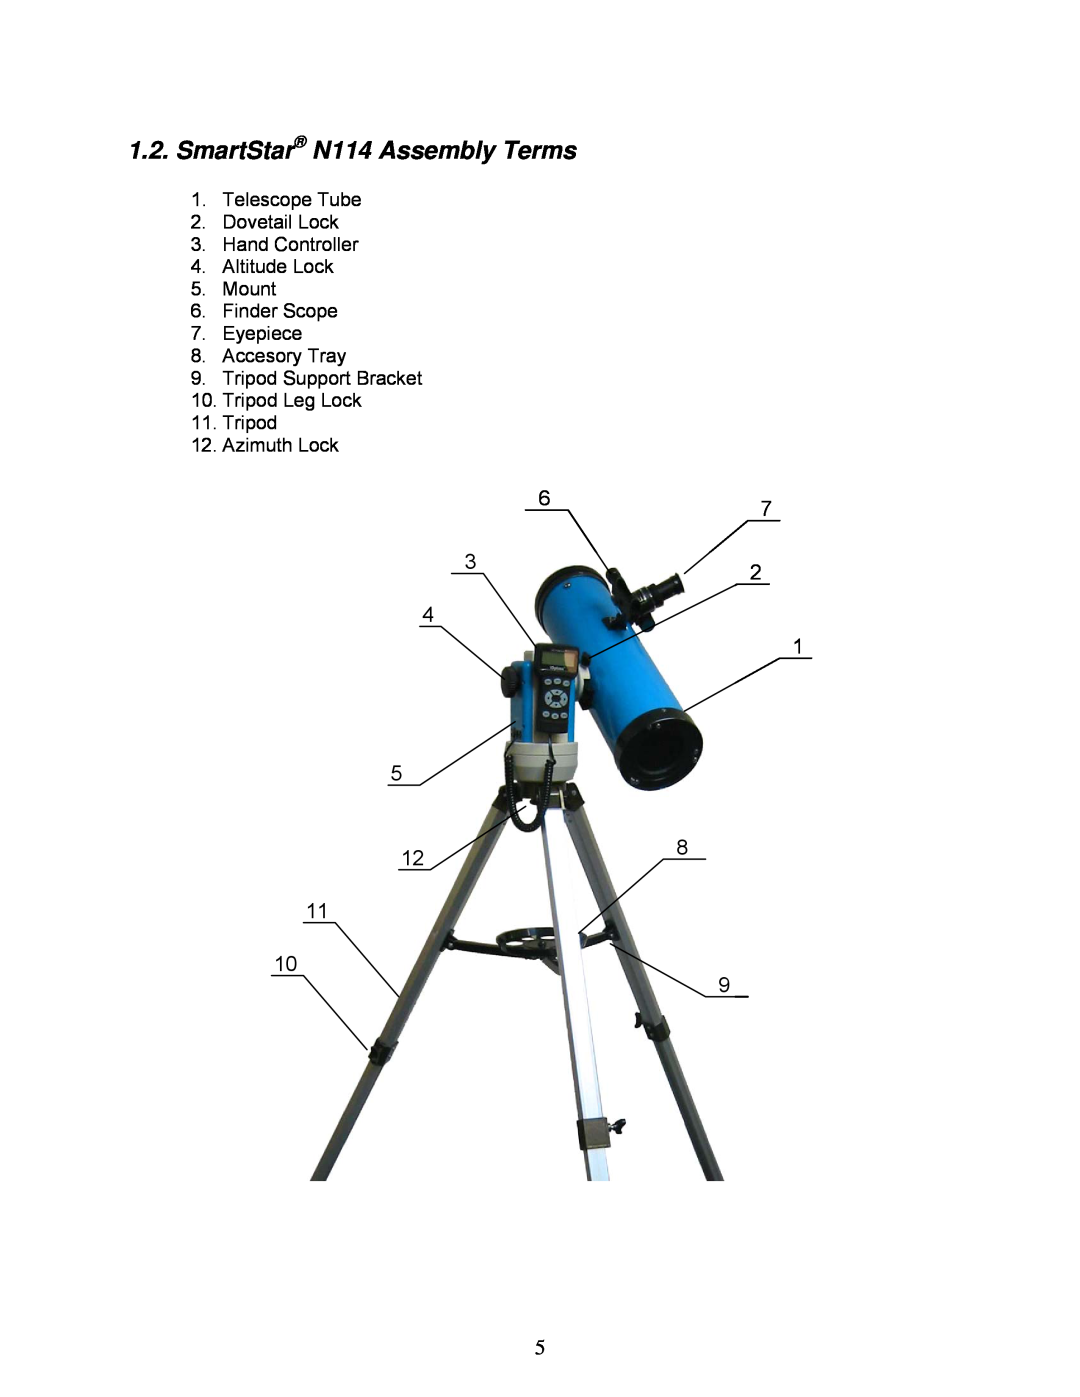 iOptron SmartStar N114 Assembly Terms, Telescope Tube 2.Dovetail Lock, Hand Controller 4.Altitude Lock 5.Mount 